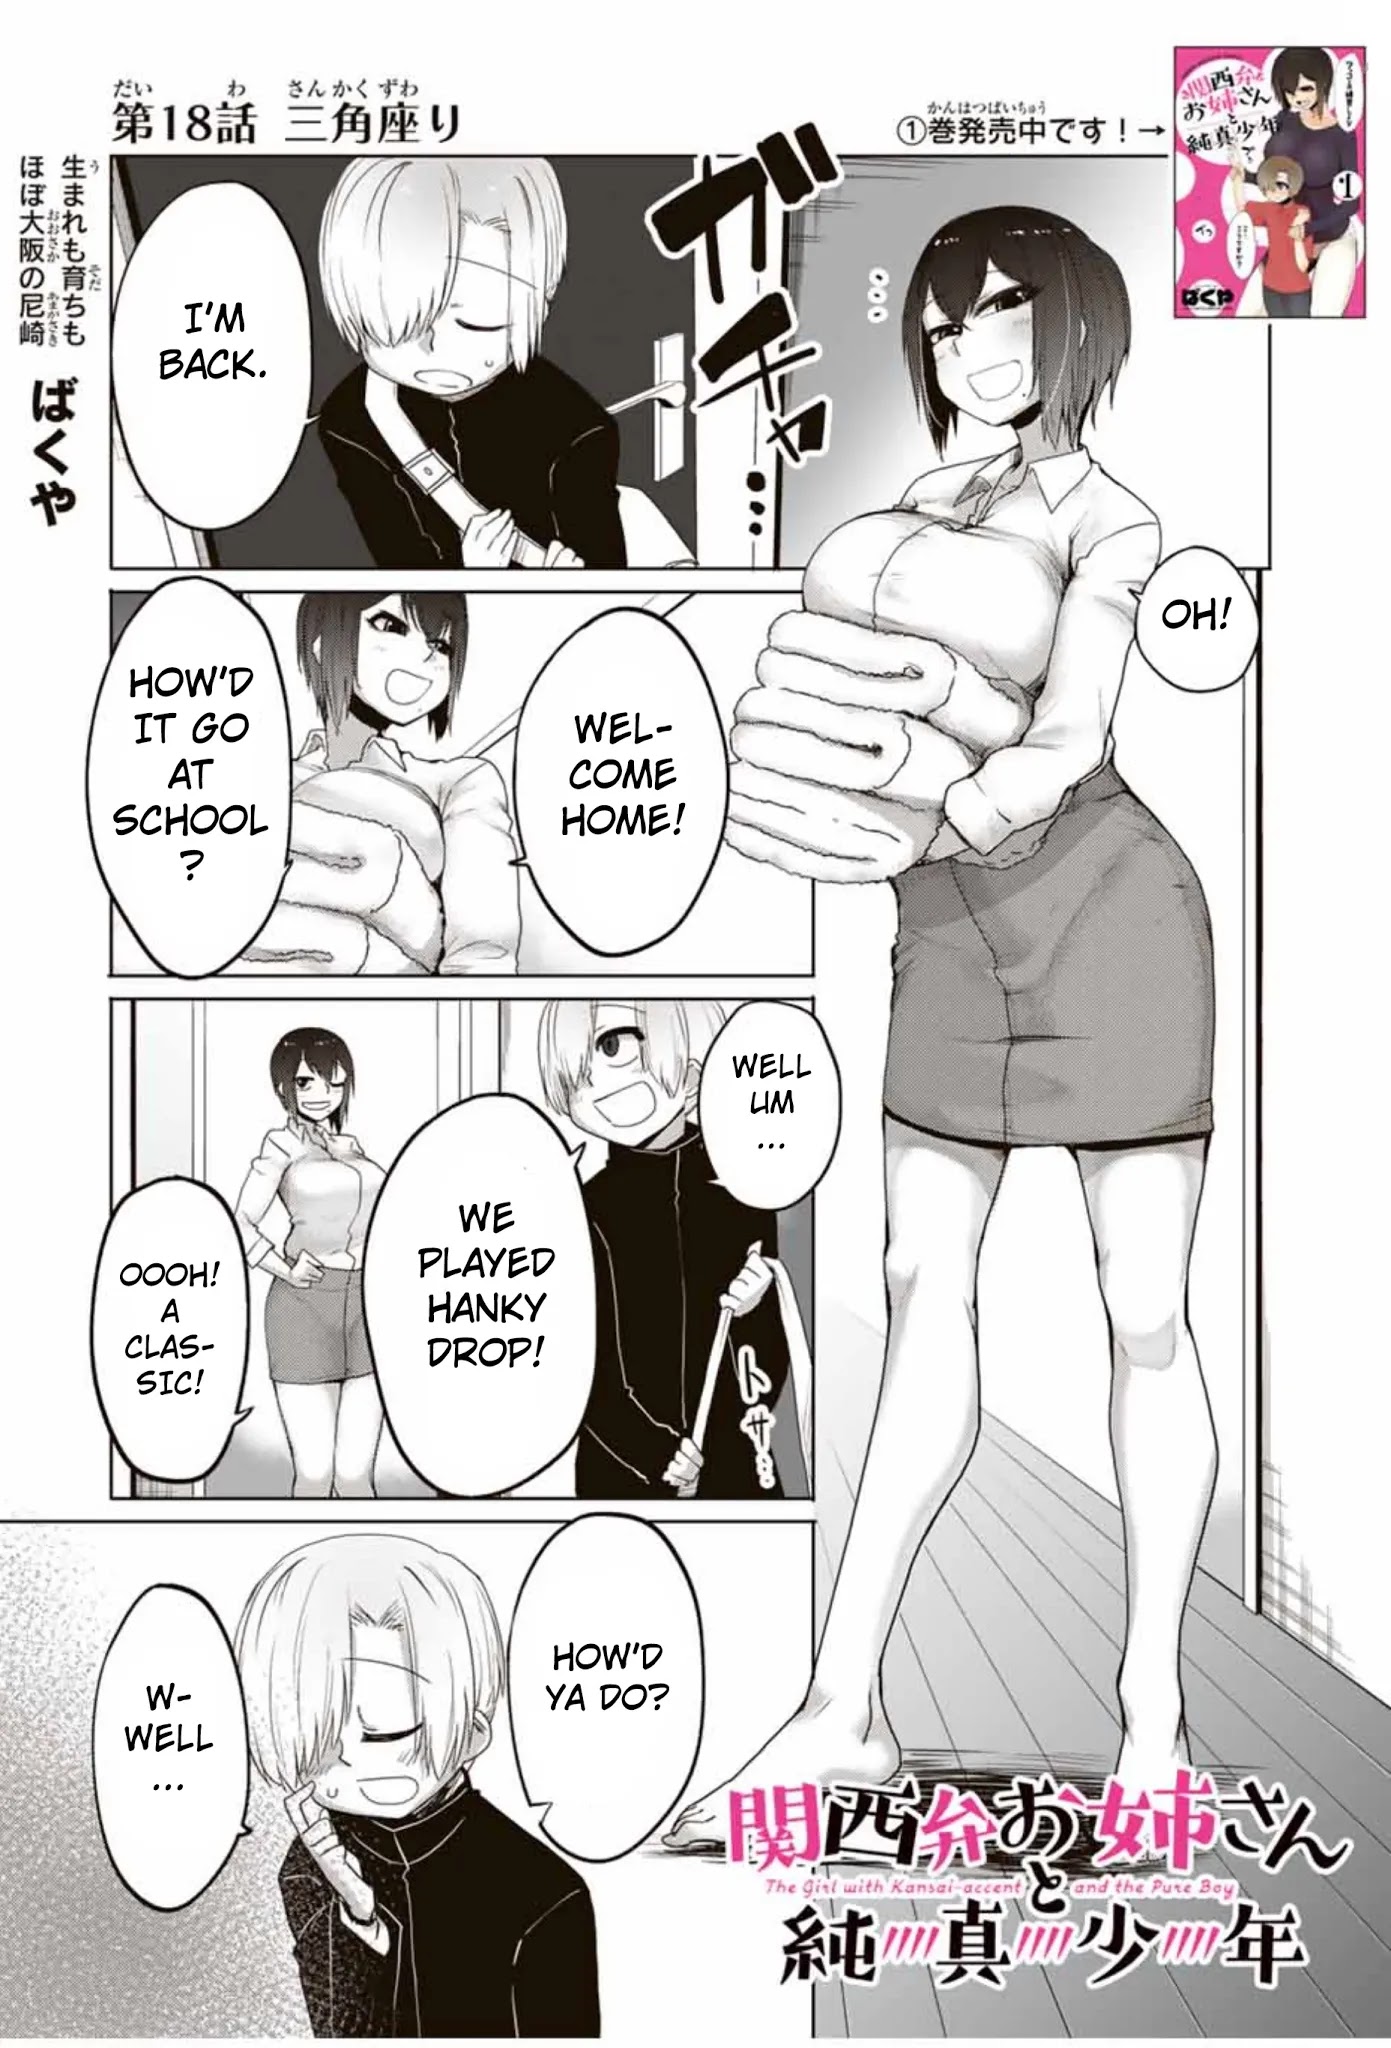 The Girl with a Kansai Accent and the Pure Boy - Chapter 18 Page 1